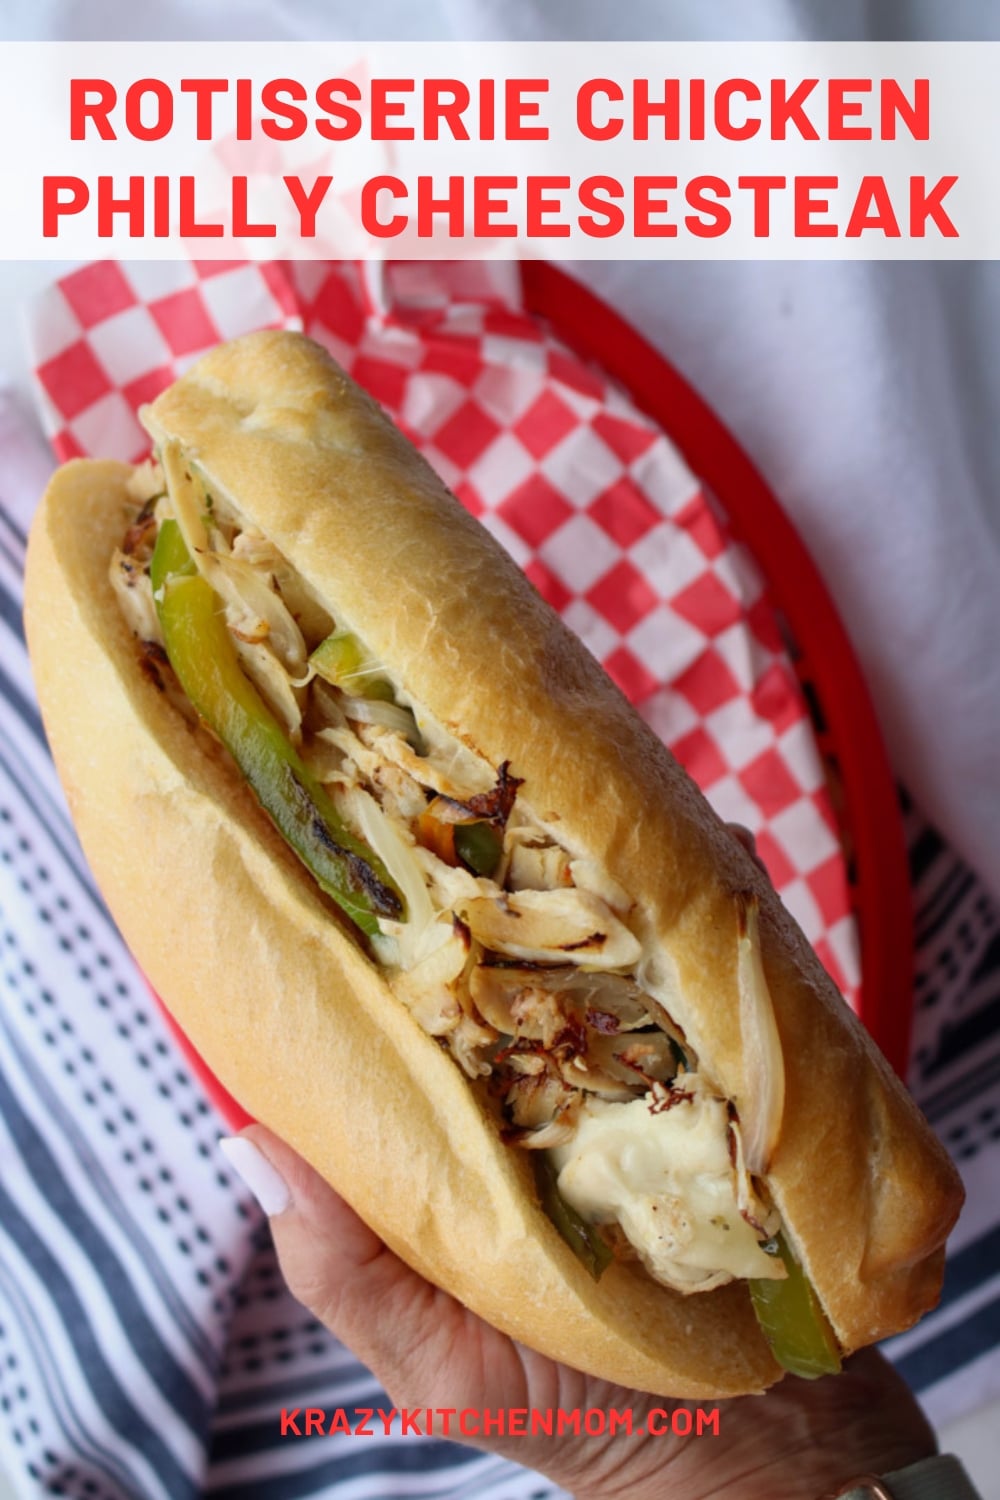 Transform an ordinary store-bought rotisserie chicken into an extraordinary Philly Cheesesteak! Comfort and convenience rolled into one. via @krazykitchenmom